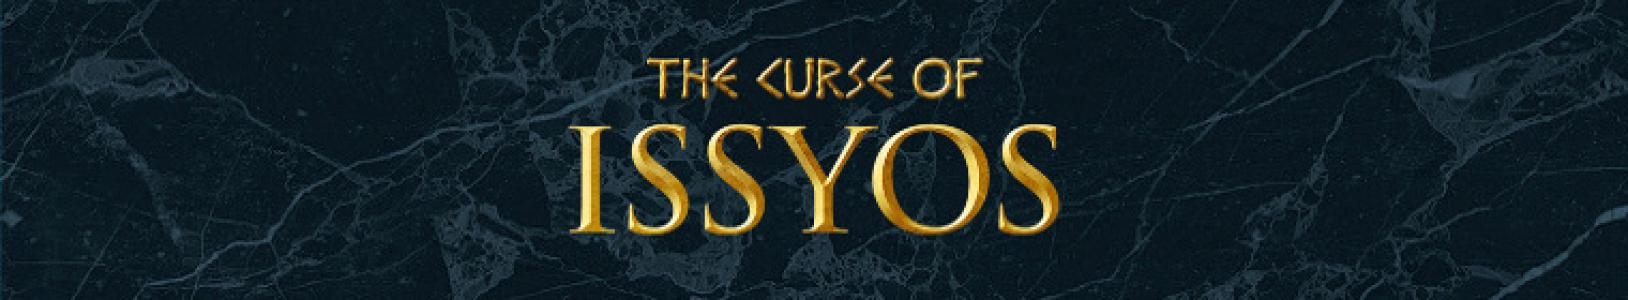 The Curse of Issyos banner